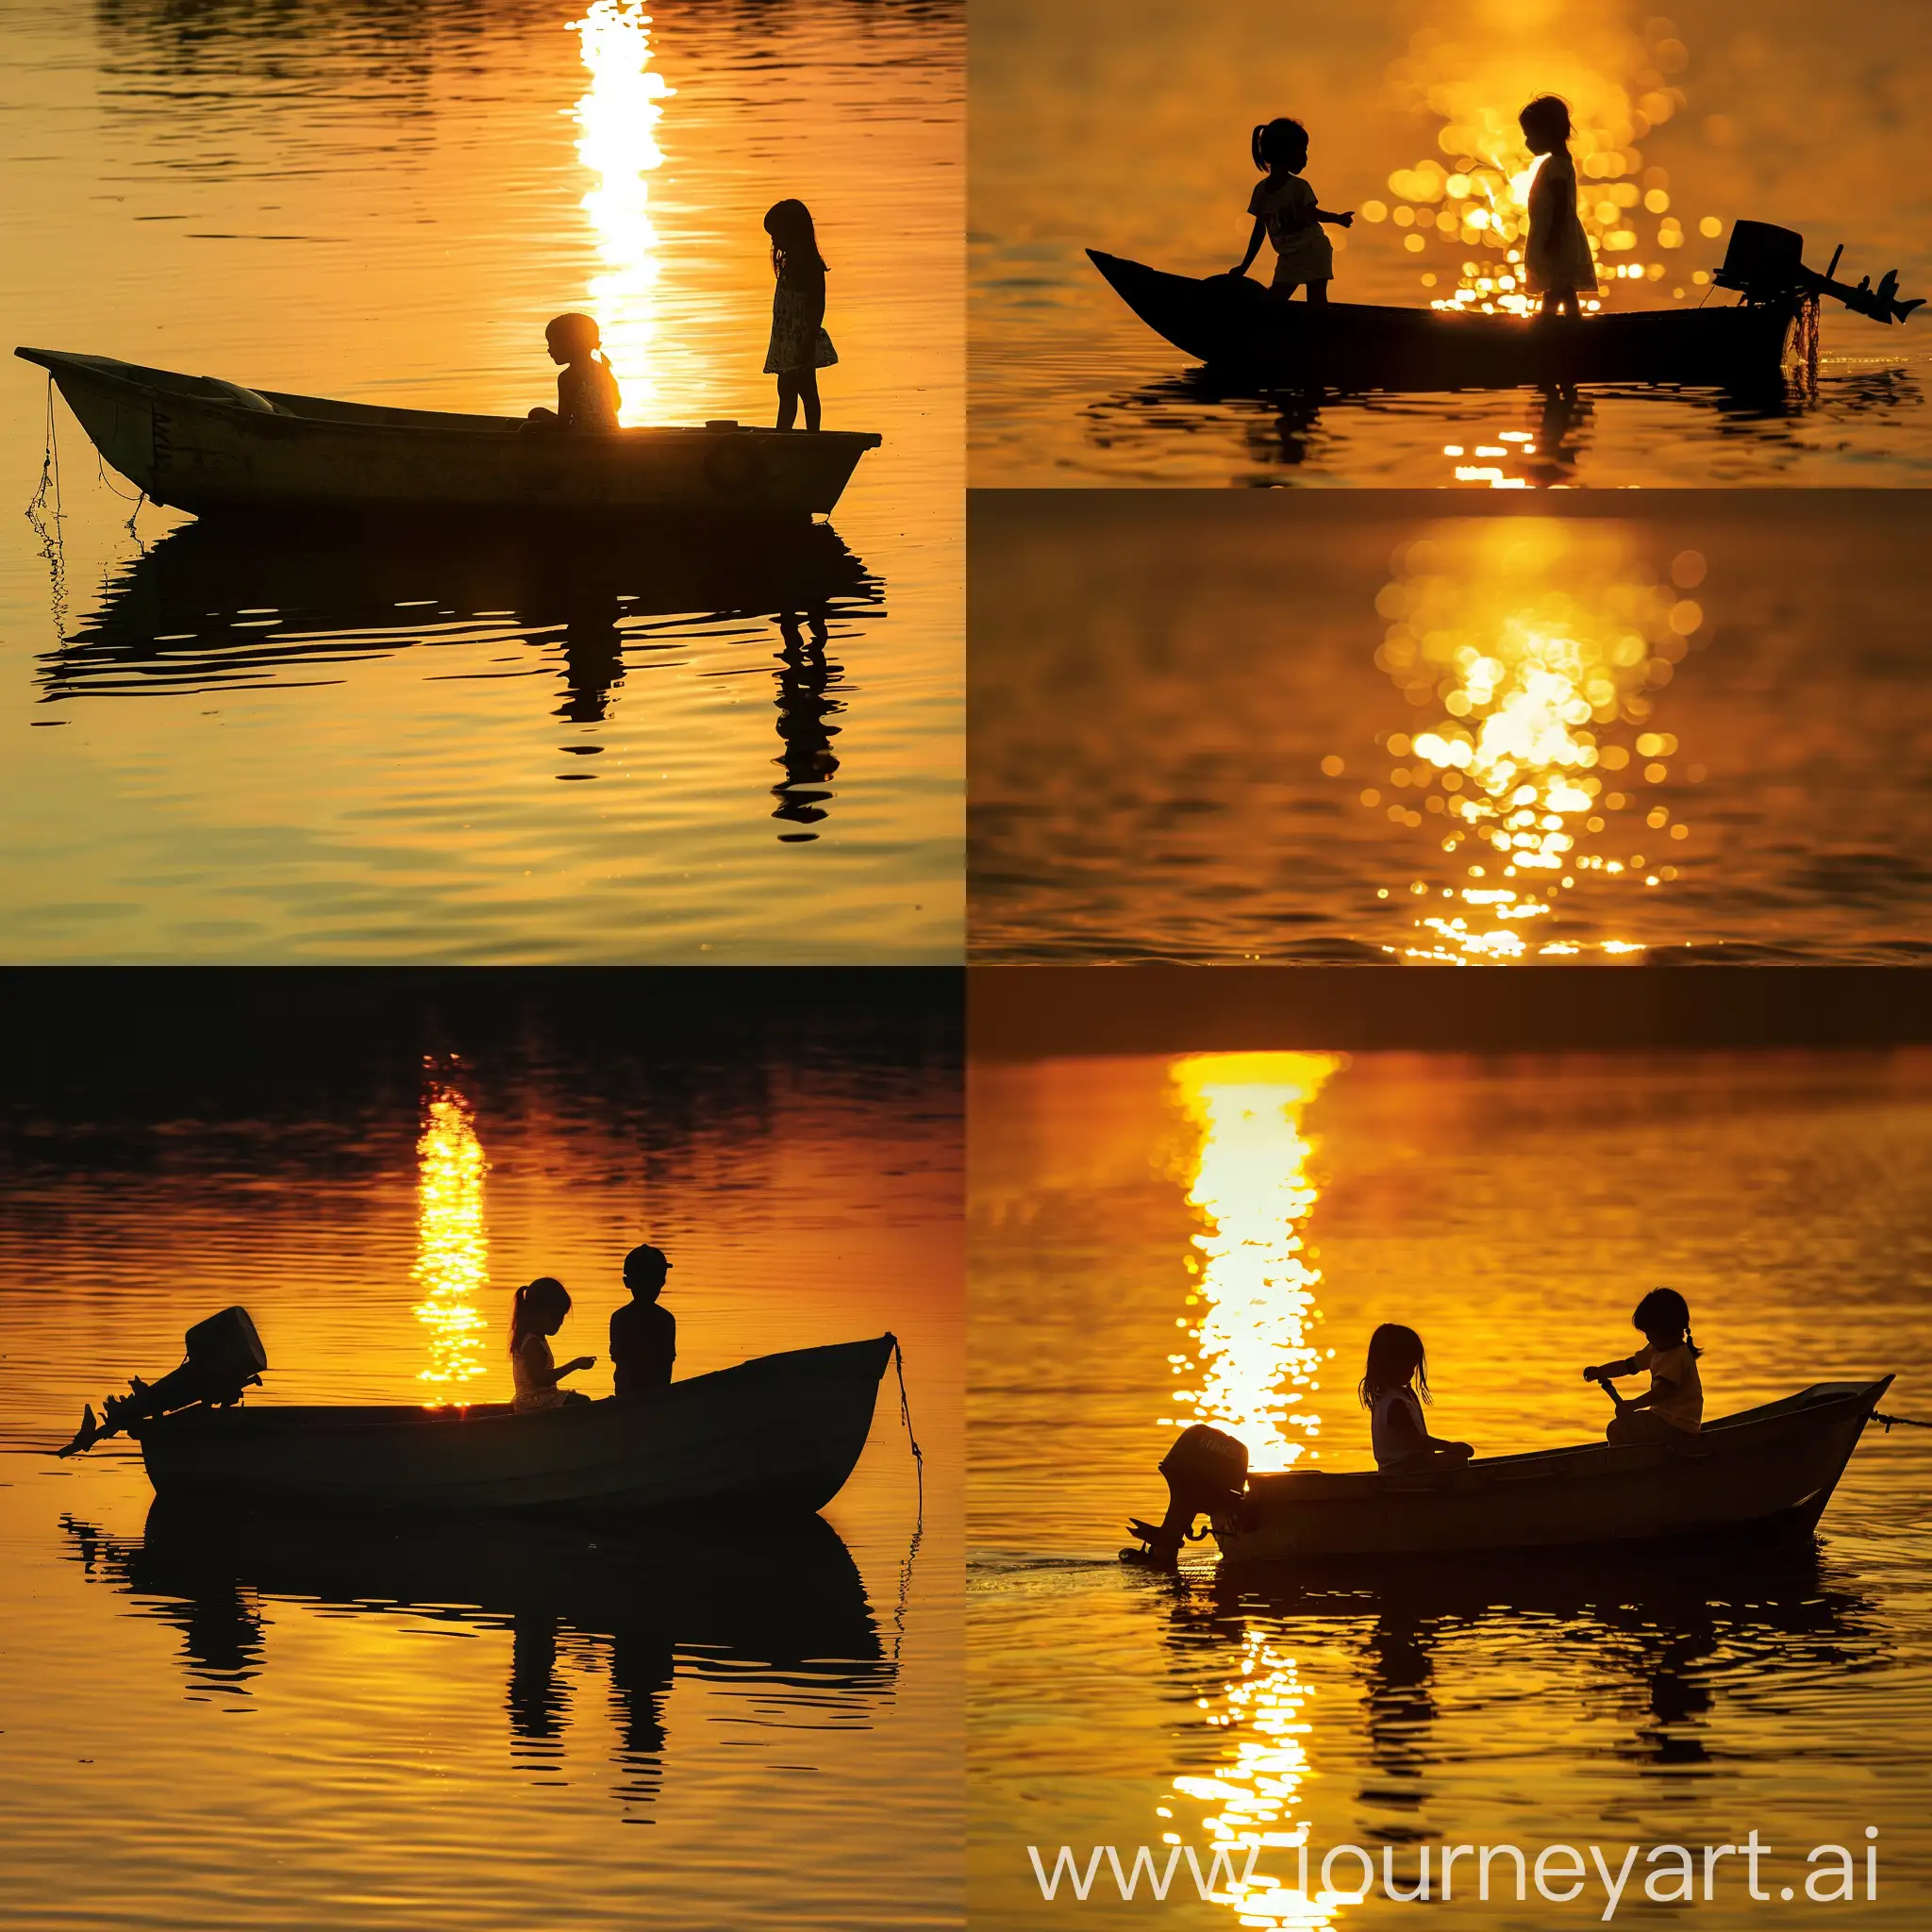 Golden-Hour-Silhouette-Serene-Fishing-Boat-Scene-with-One-Girl-and-One-Boy